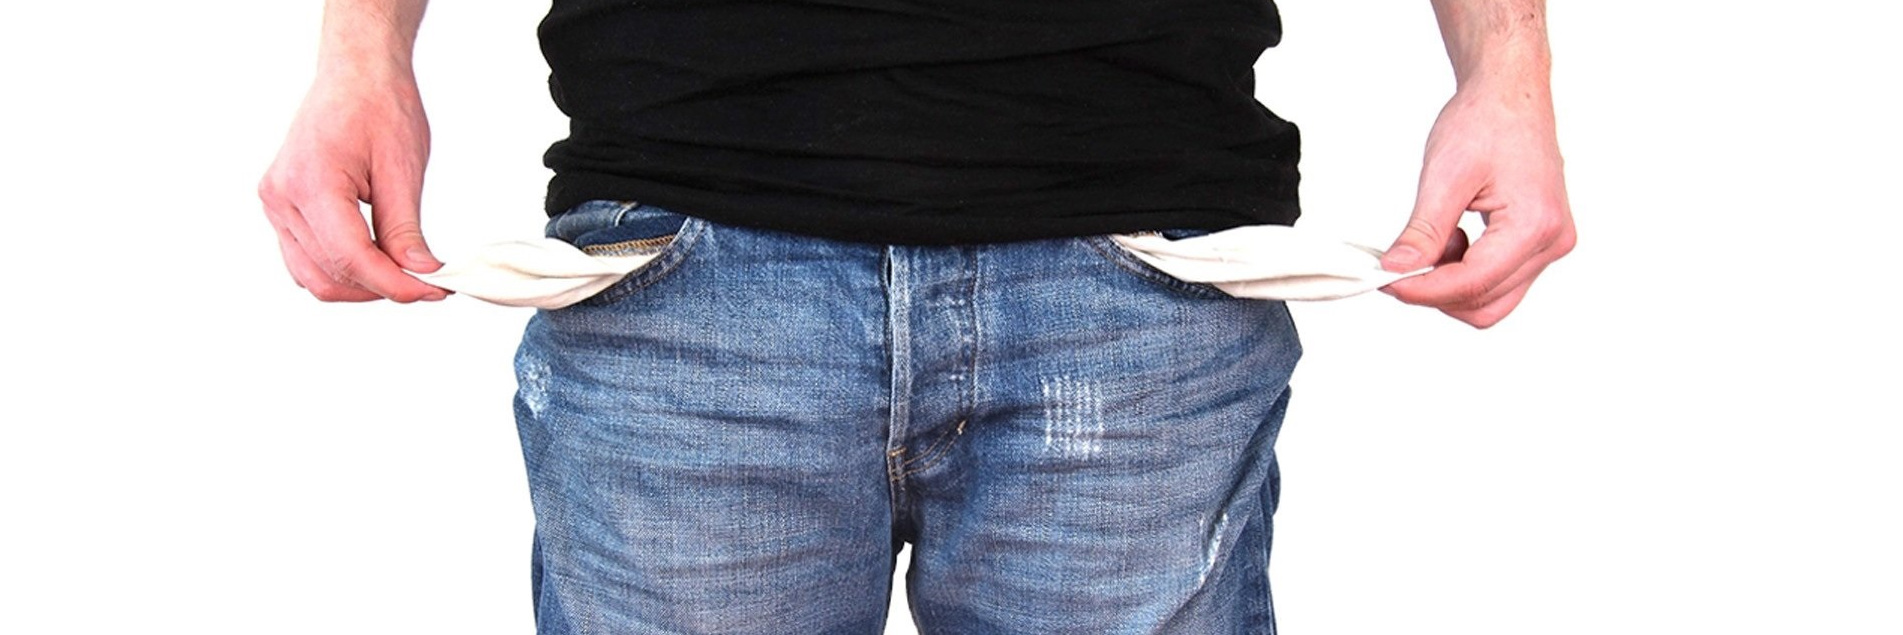 Picture detail man with jeans pockets pulled outwards